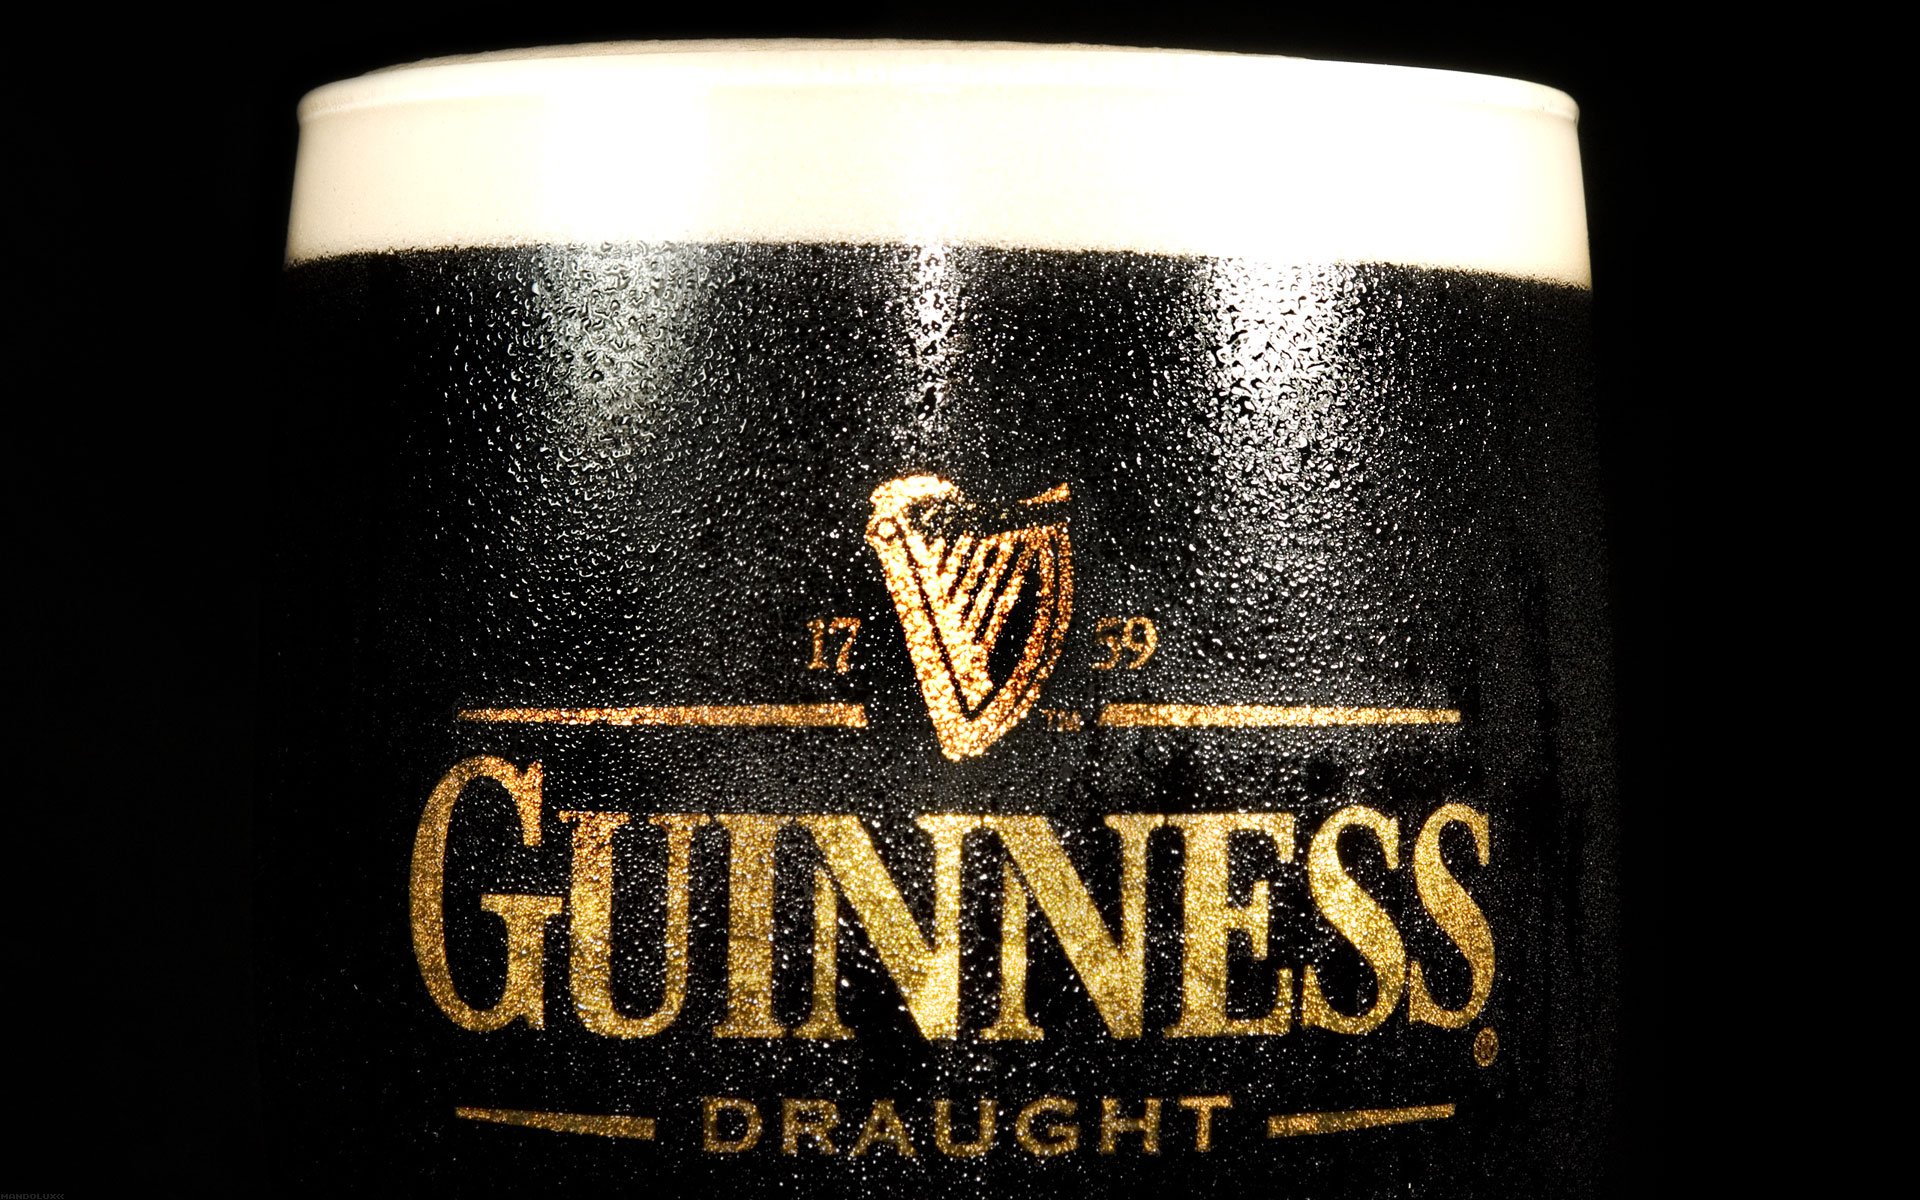 Products Guinness 1920x1200